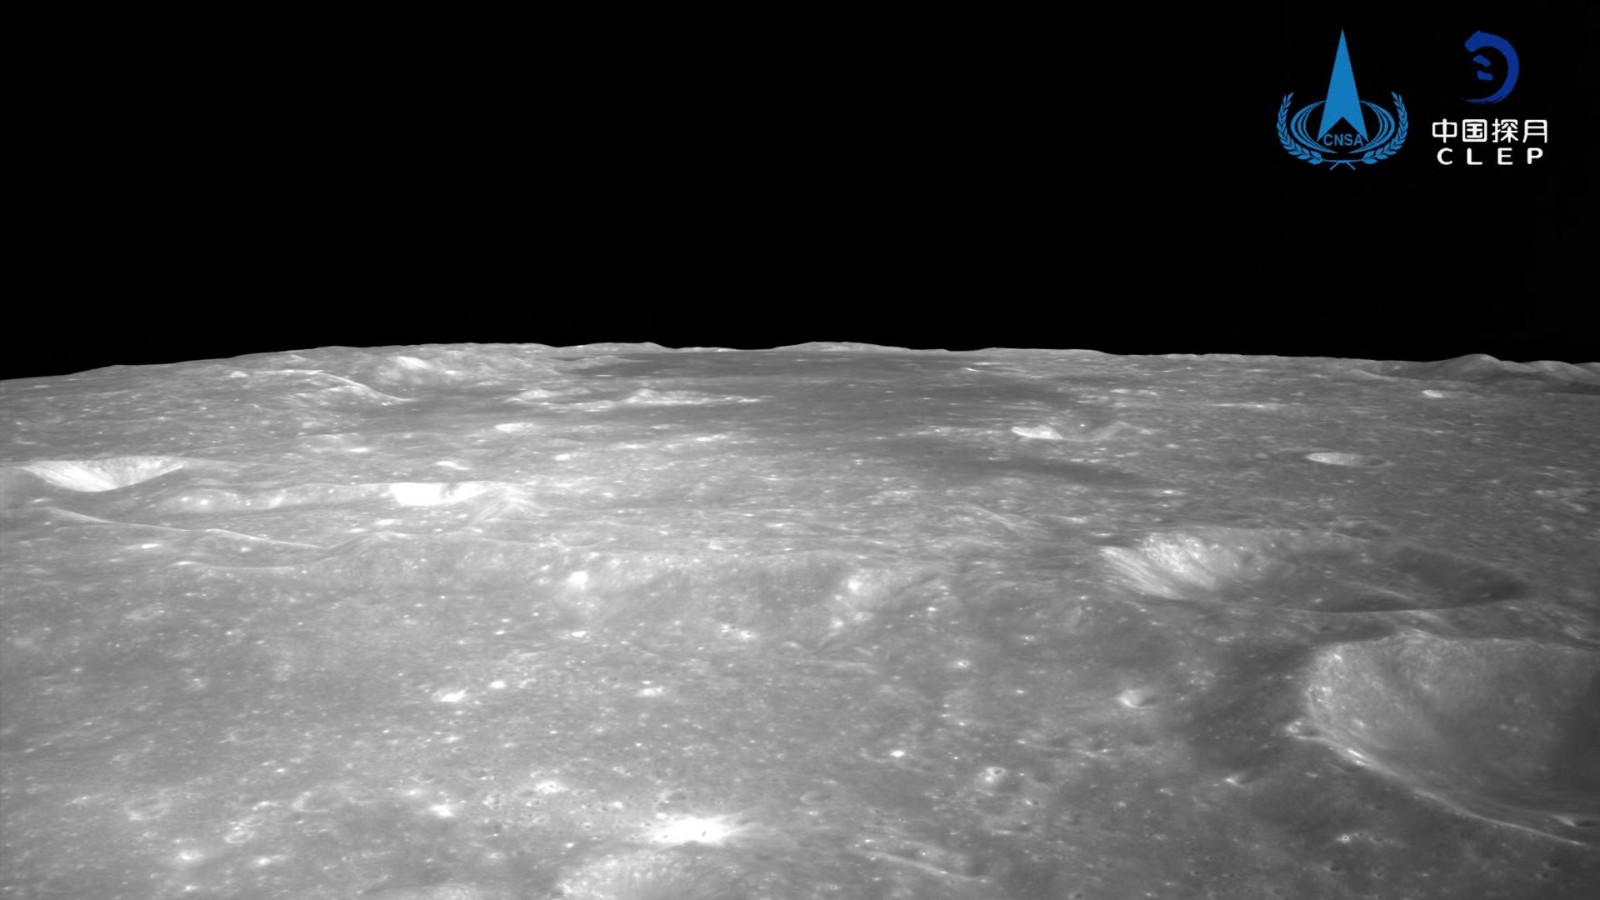 This undated handout photo shows craters on the surface of the moon captured by China's Chang'e-6 lunar probe. /China National Space Administration
